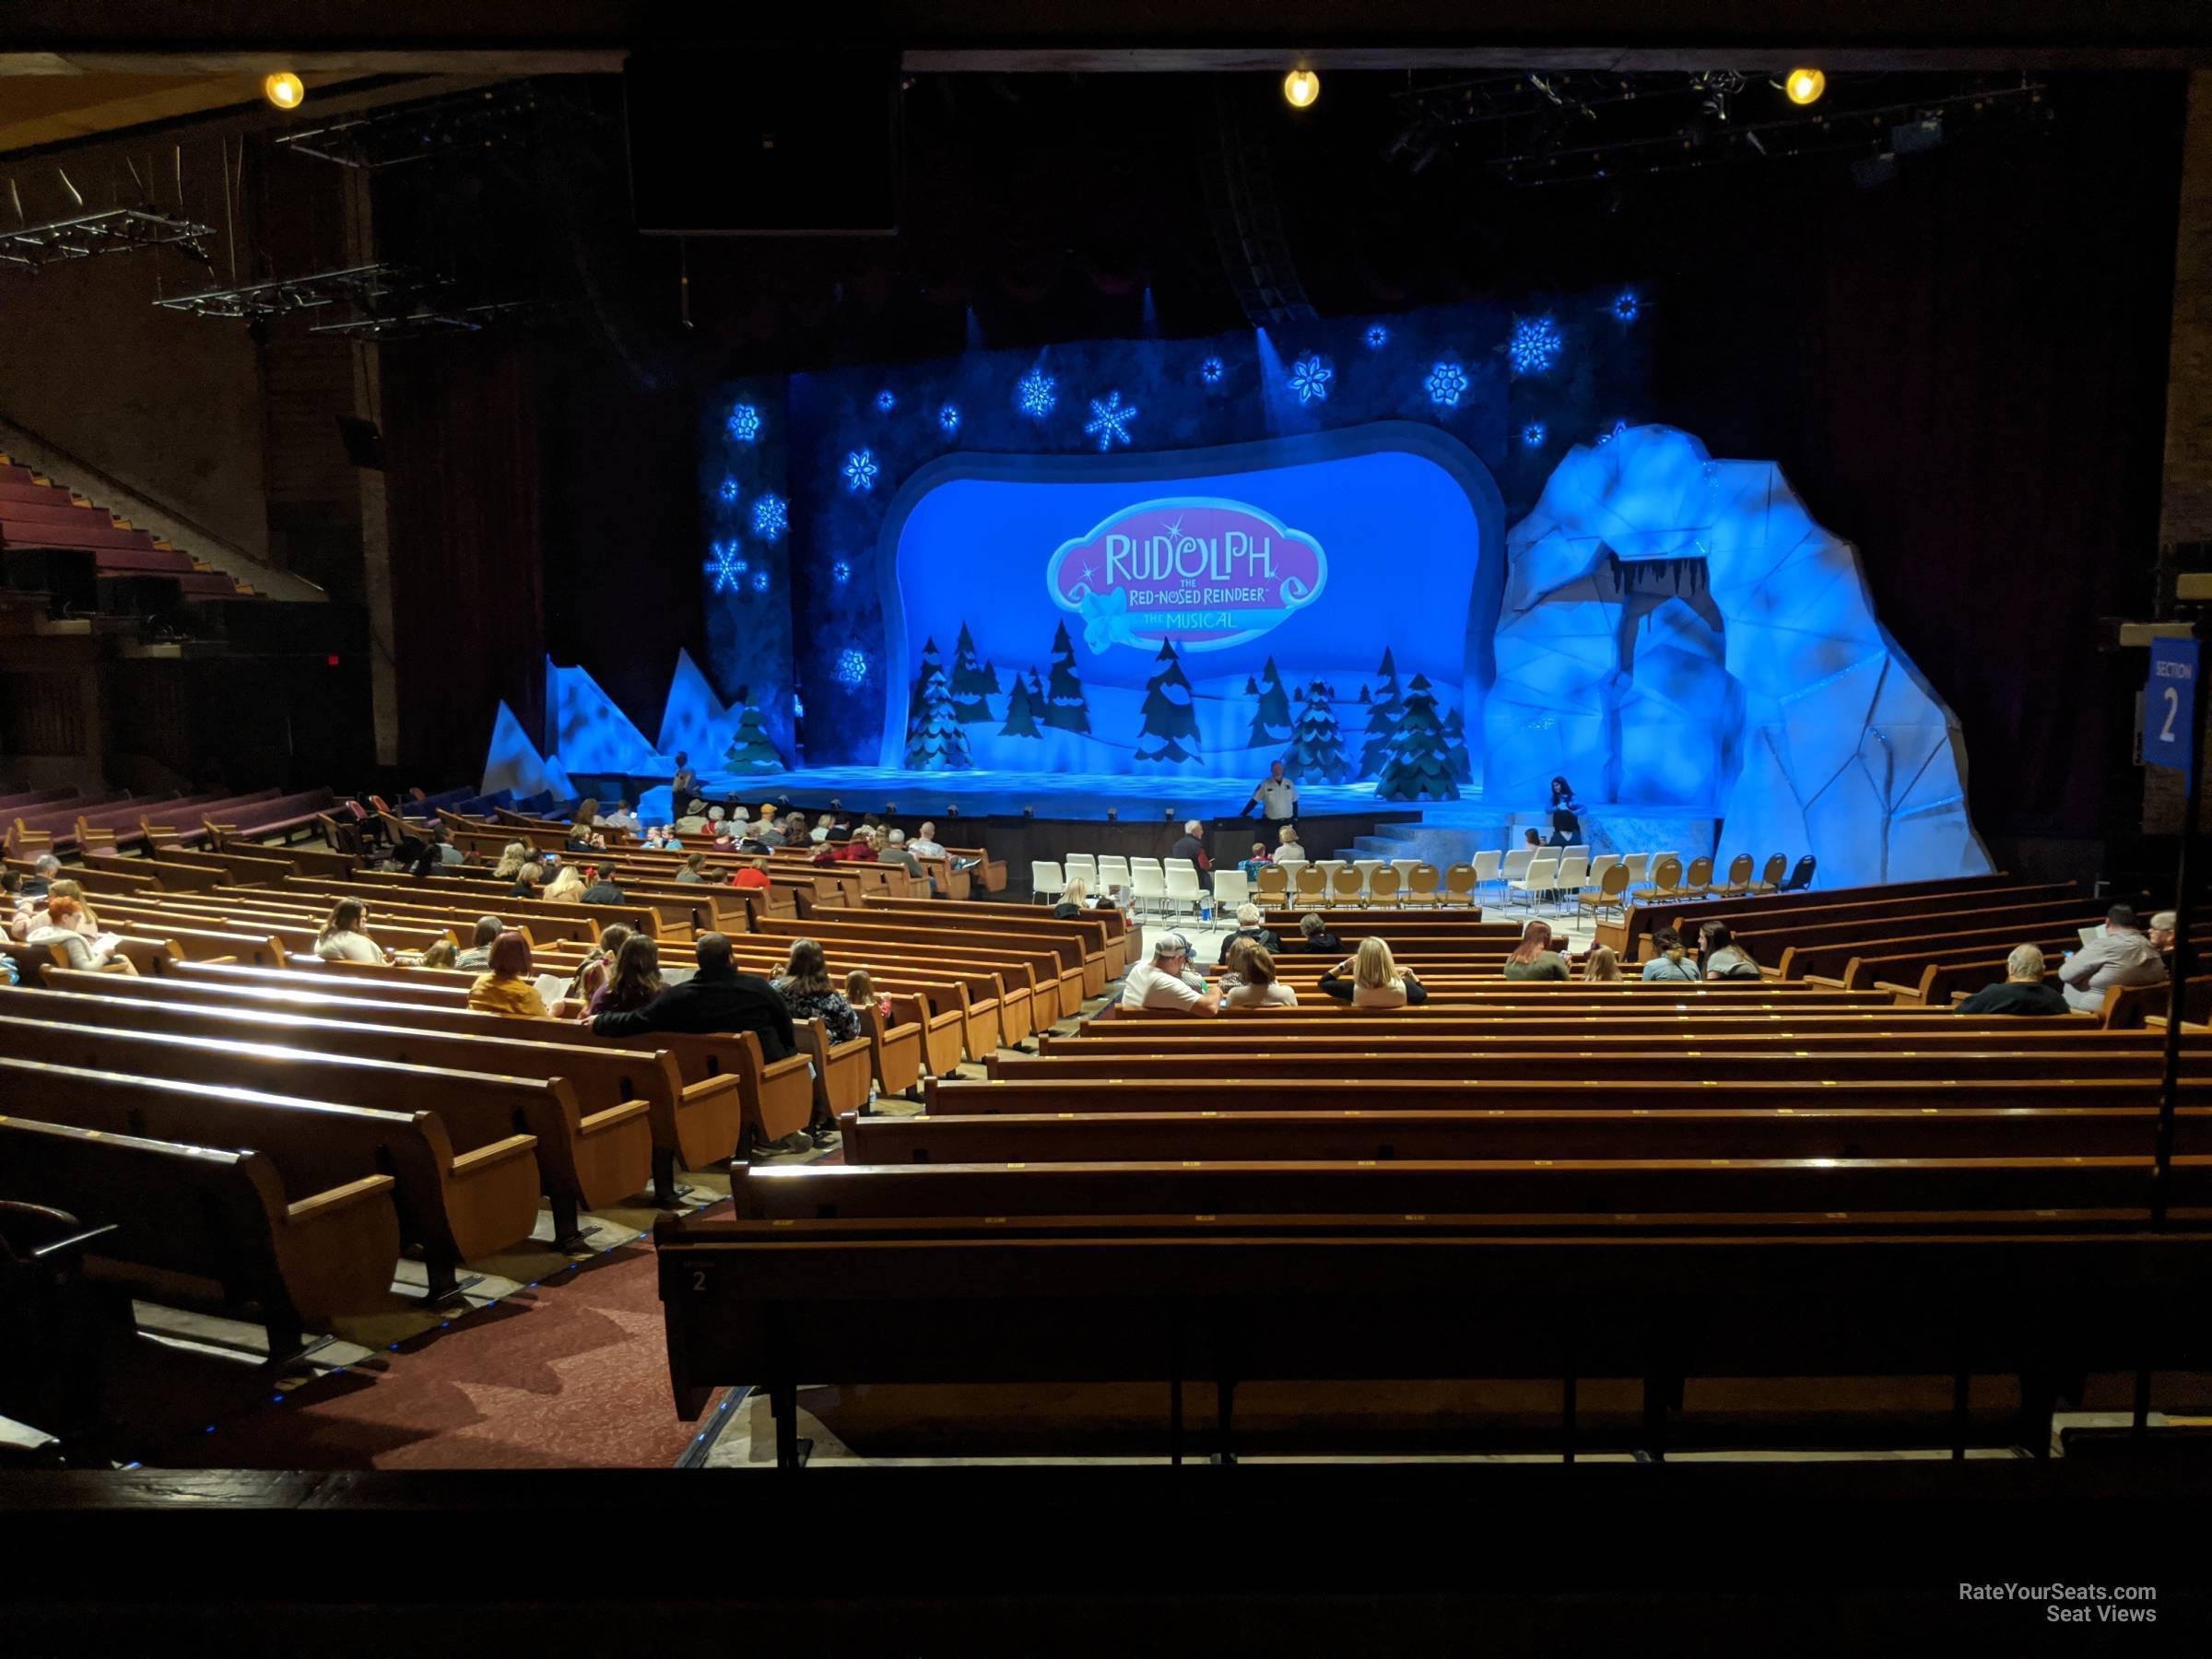 section 10, row v seat view  - grand ole opry house